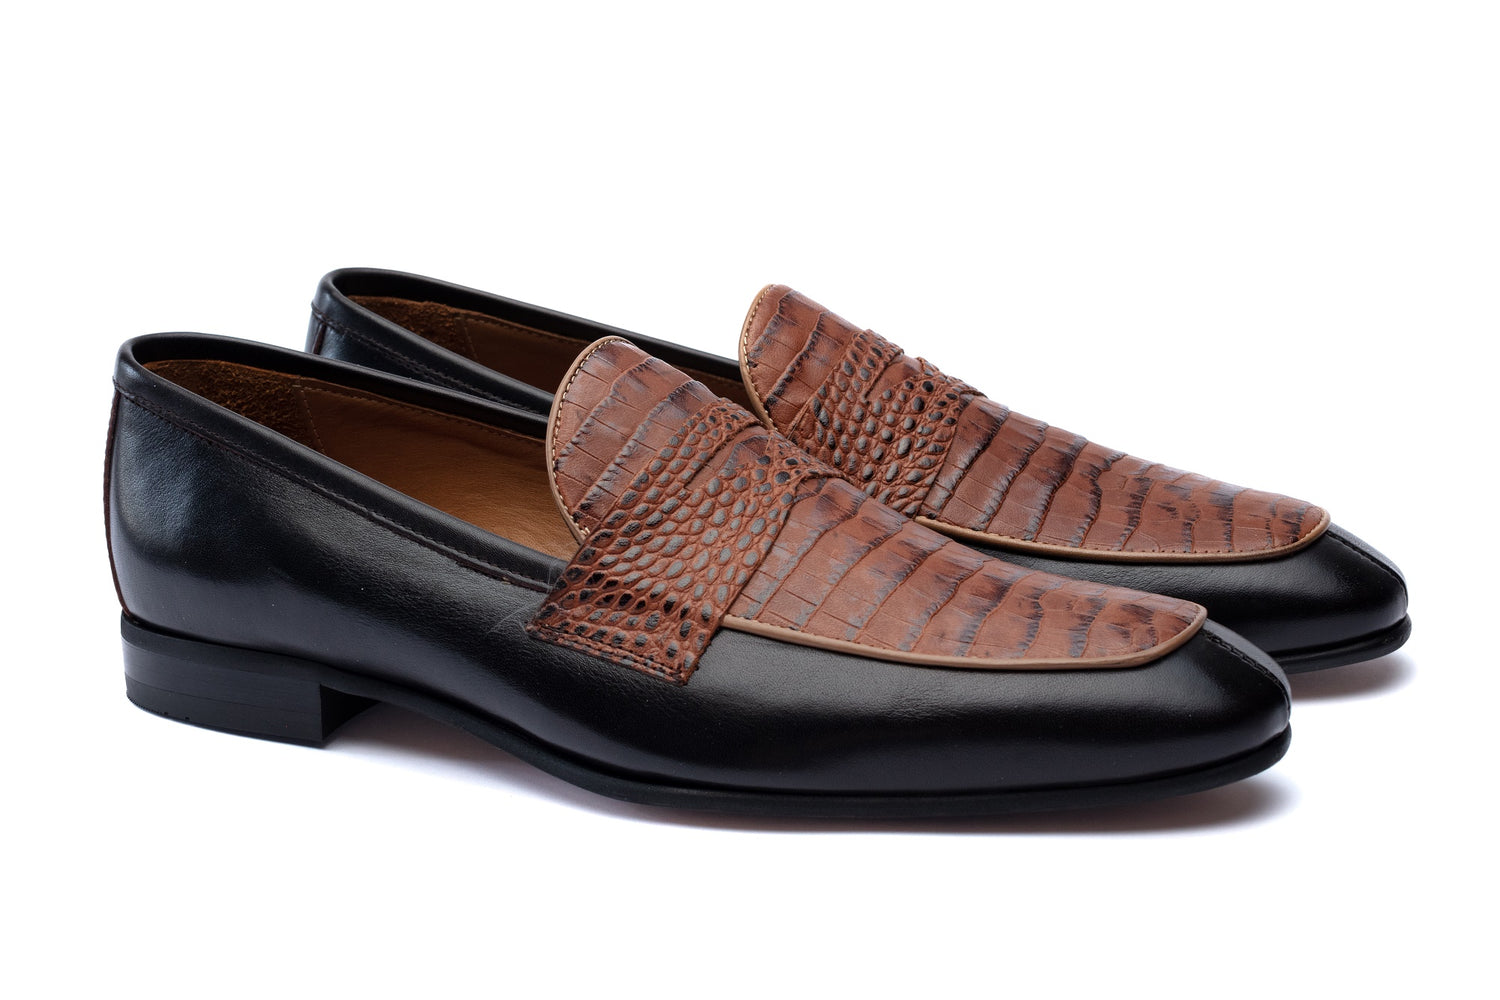 The Cali Loafers - Loafers by Urbbana